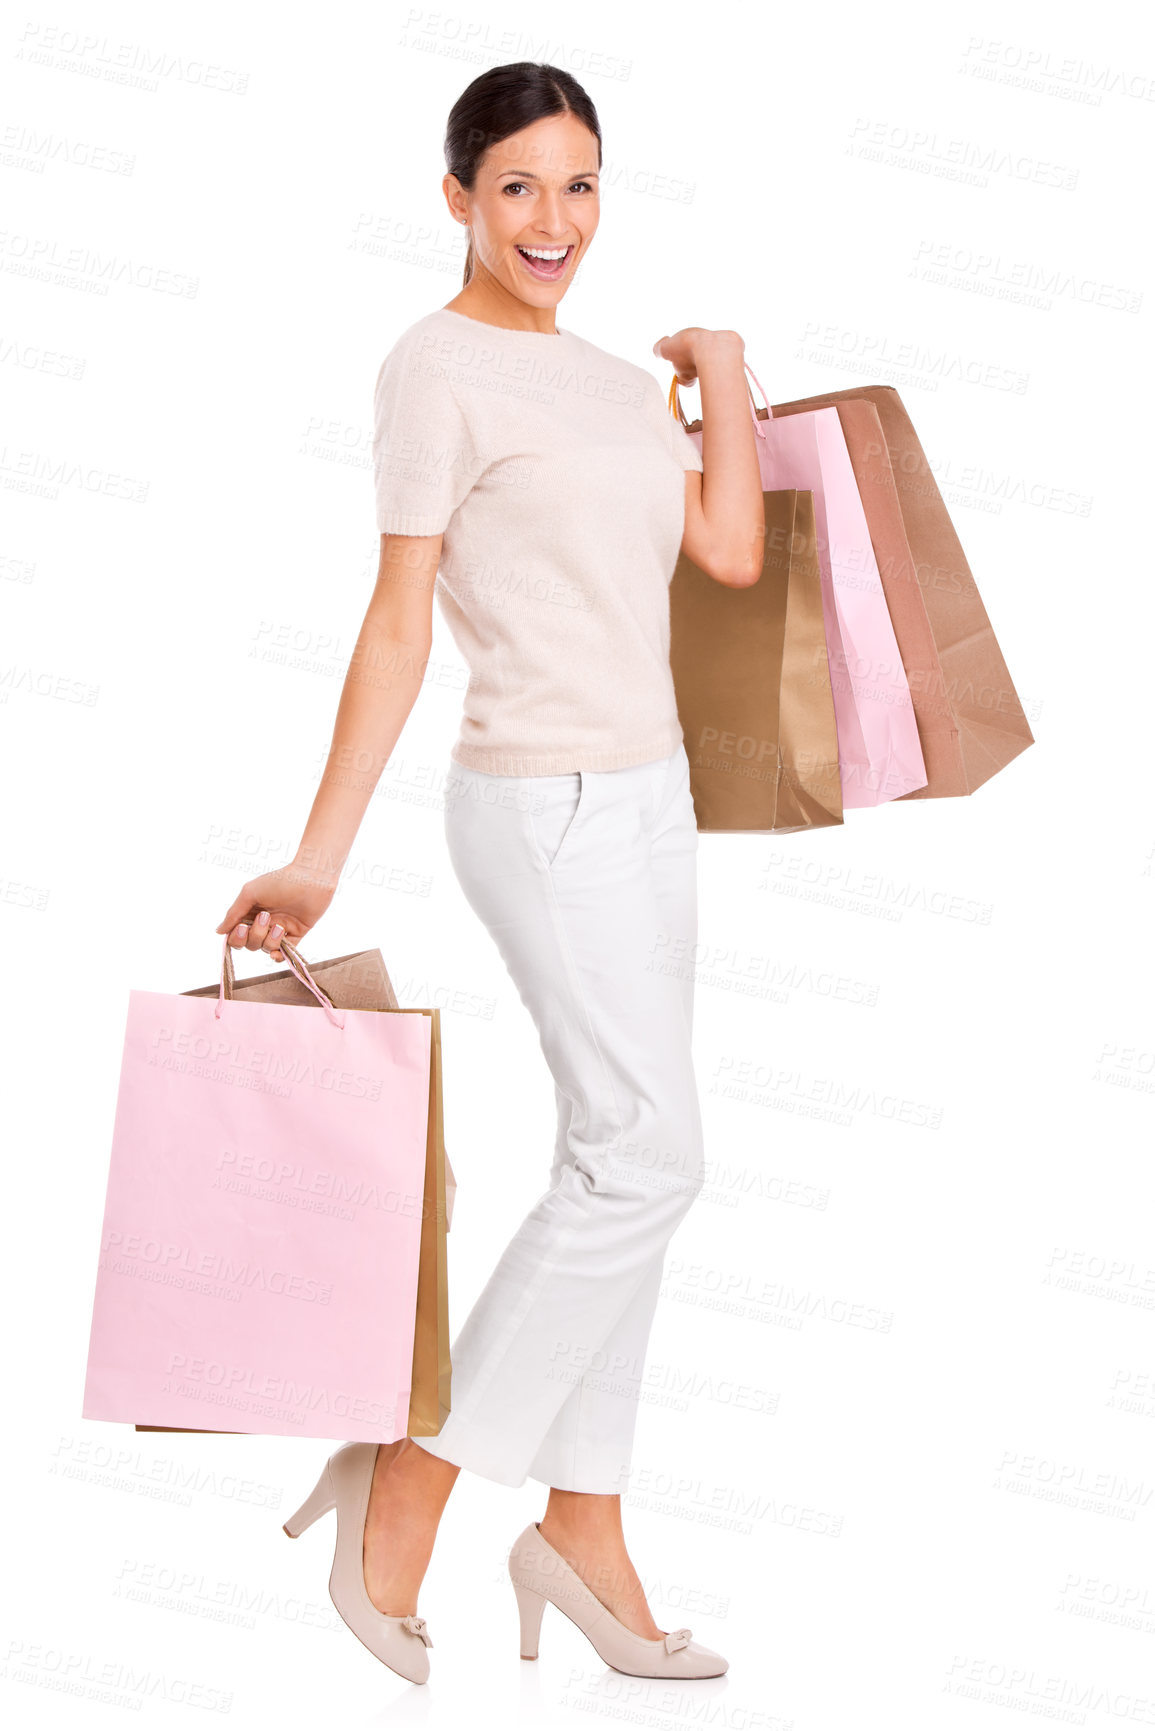 Buy stock photo Excited, shopping and portrait of woman on a white background with bag for sale, discount and deal. Fashion, happy customer and isolated person for retail products, consumerism and purchase in studio